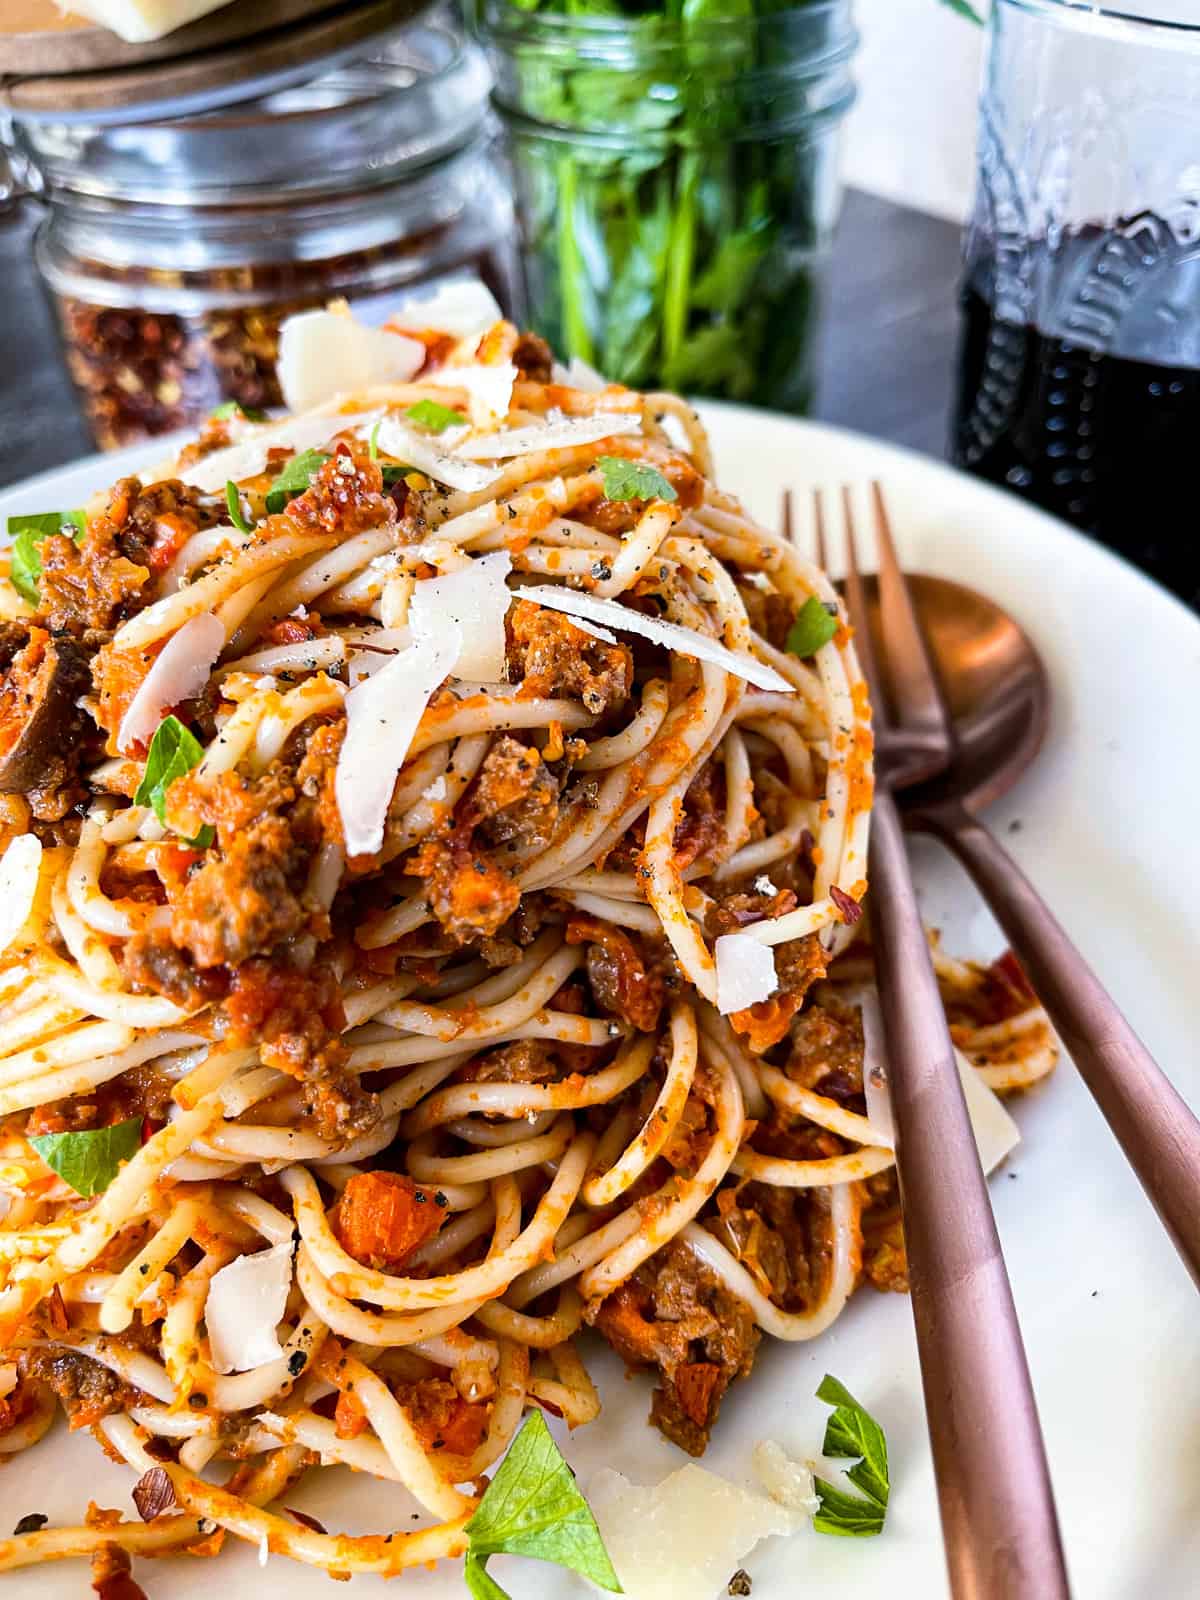 bolognese sauce tossed with spaghetti noodles and topped with parmesan cheese